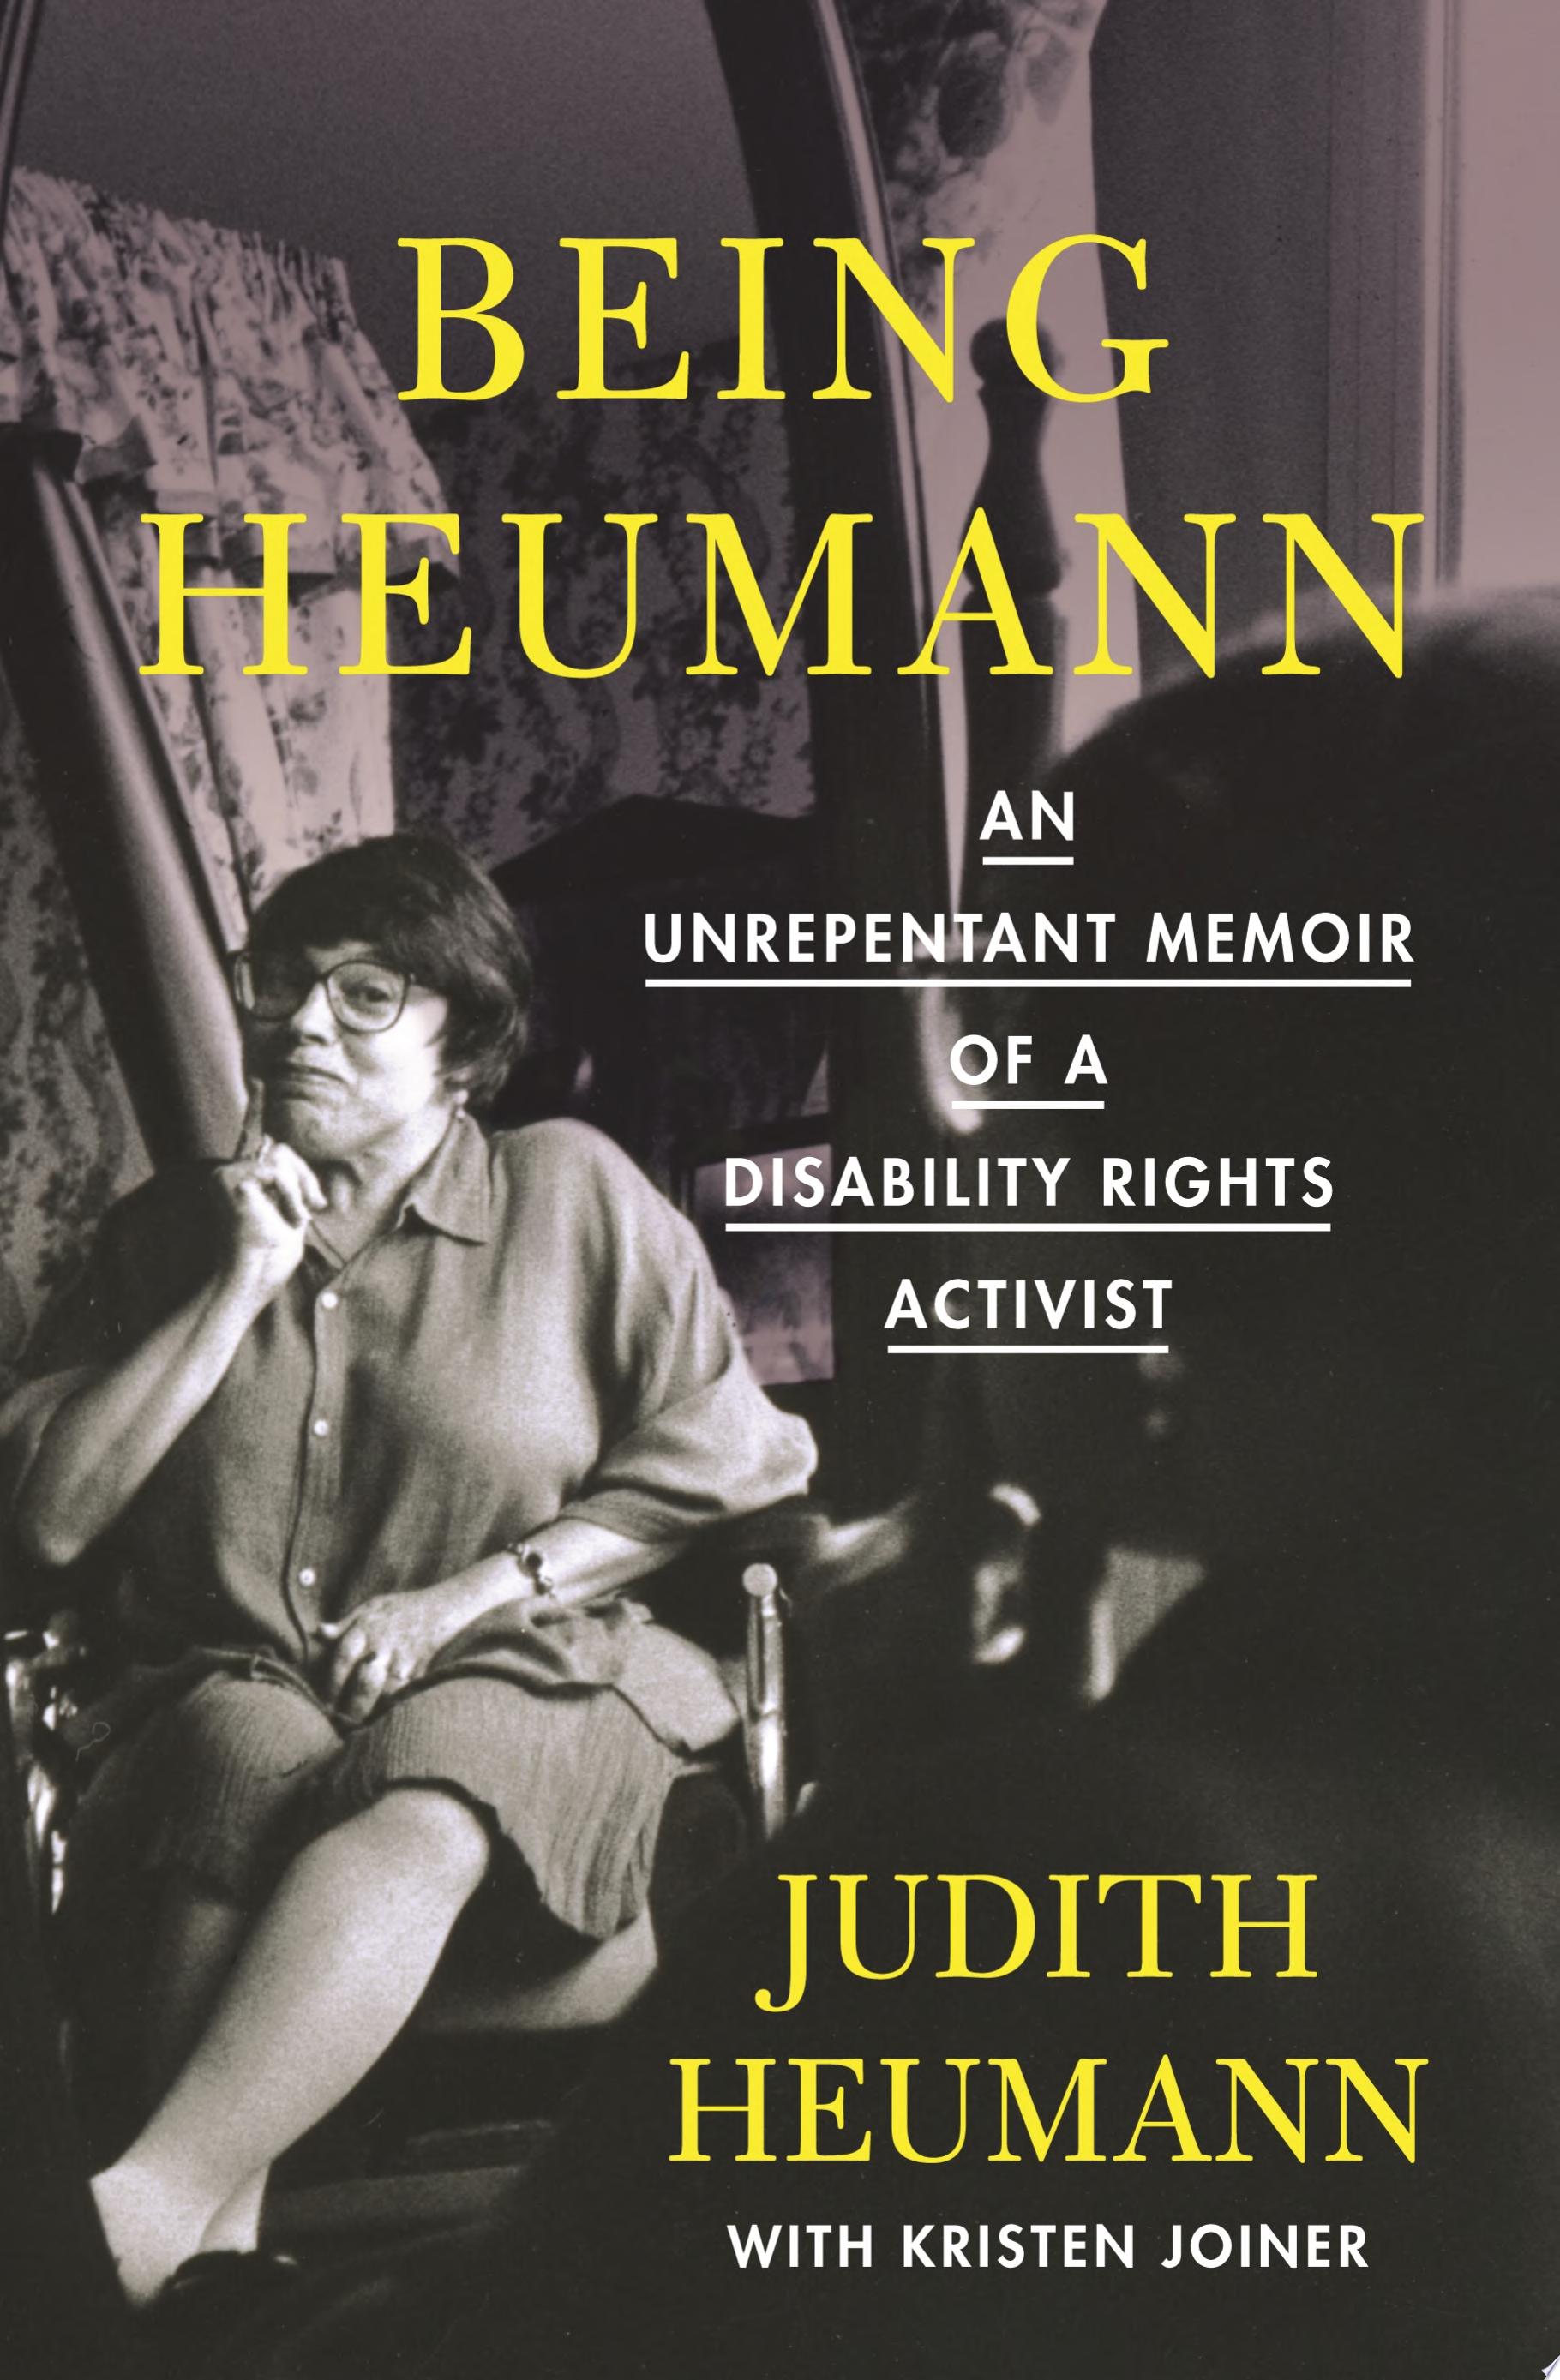 Image for "Being Heumann"